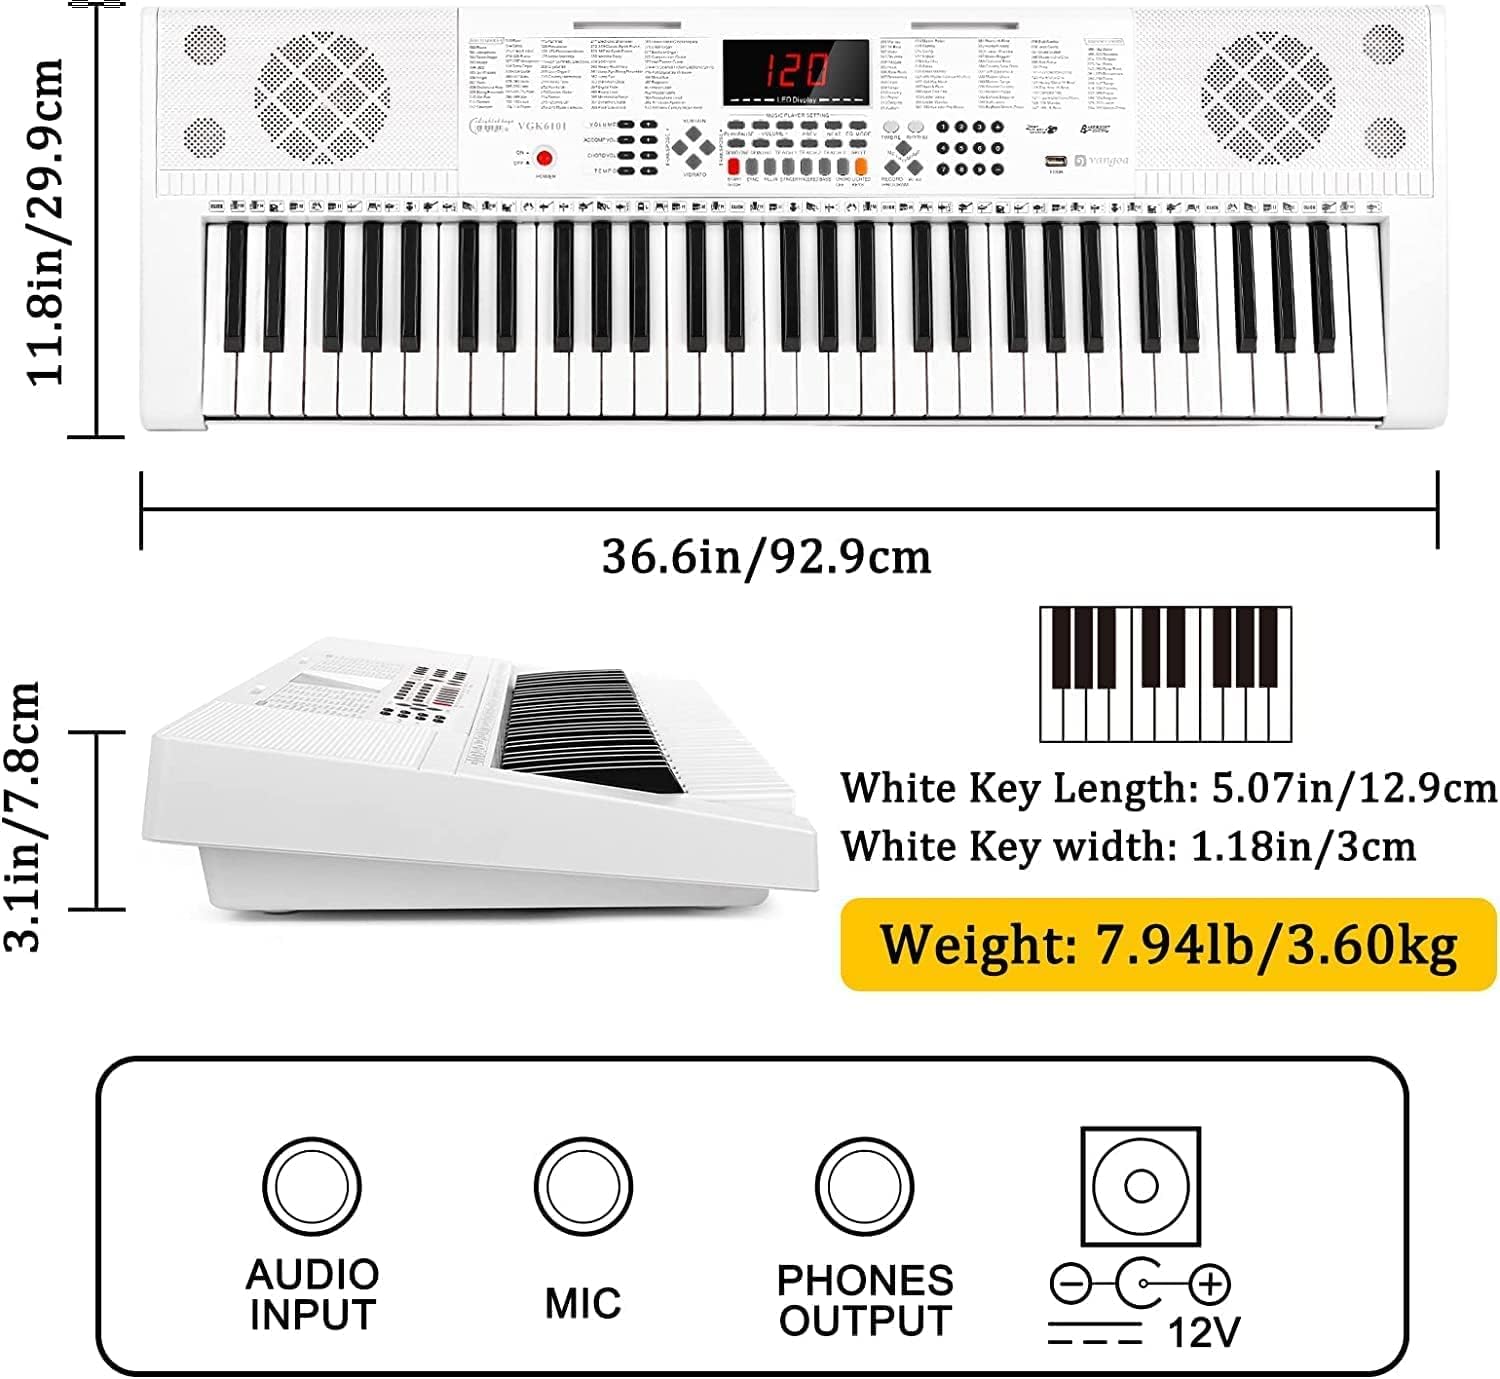 Vangoa Keyboard Piano 61 Key - Electric Piano Keyboard with 3 Teaching Modes, Learning Lighted up Music Keyboard Piano with Stand for Beginners and Students, VGK6101 White